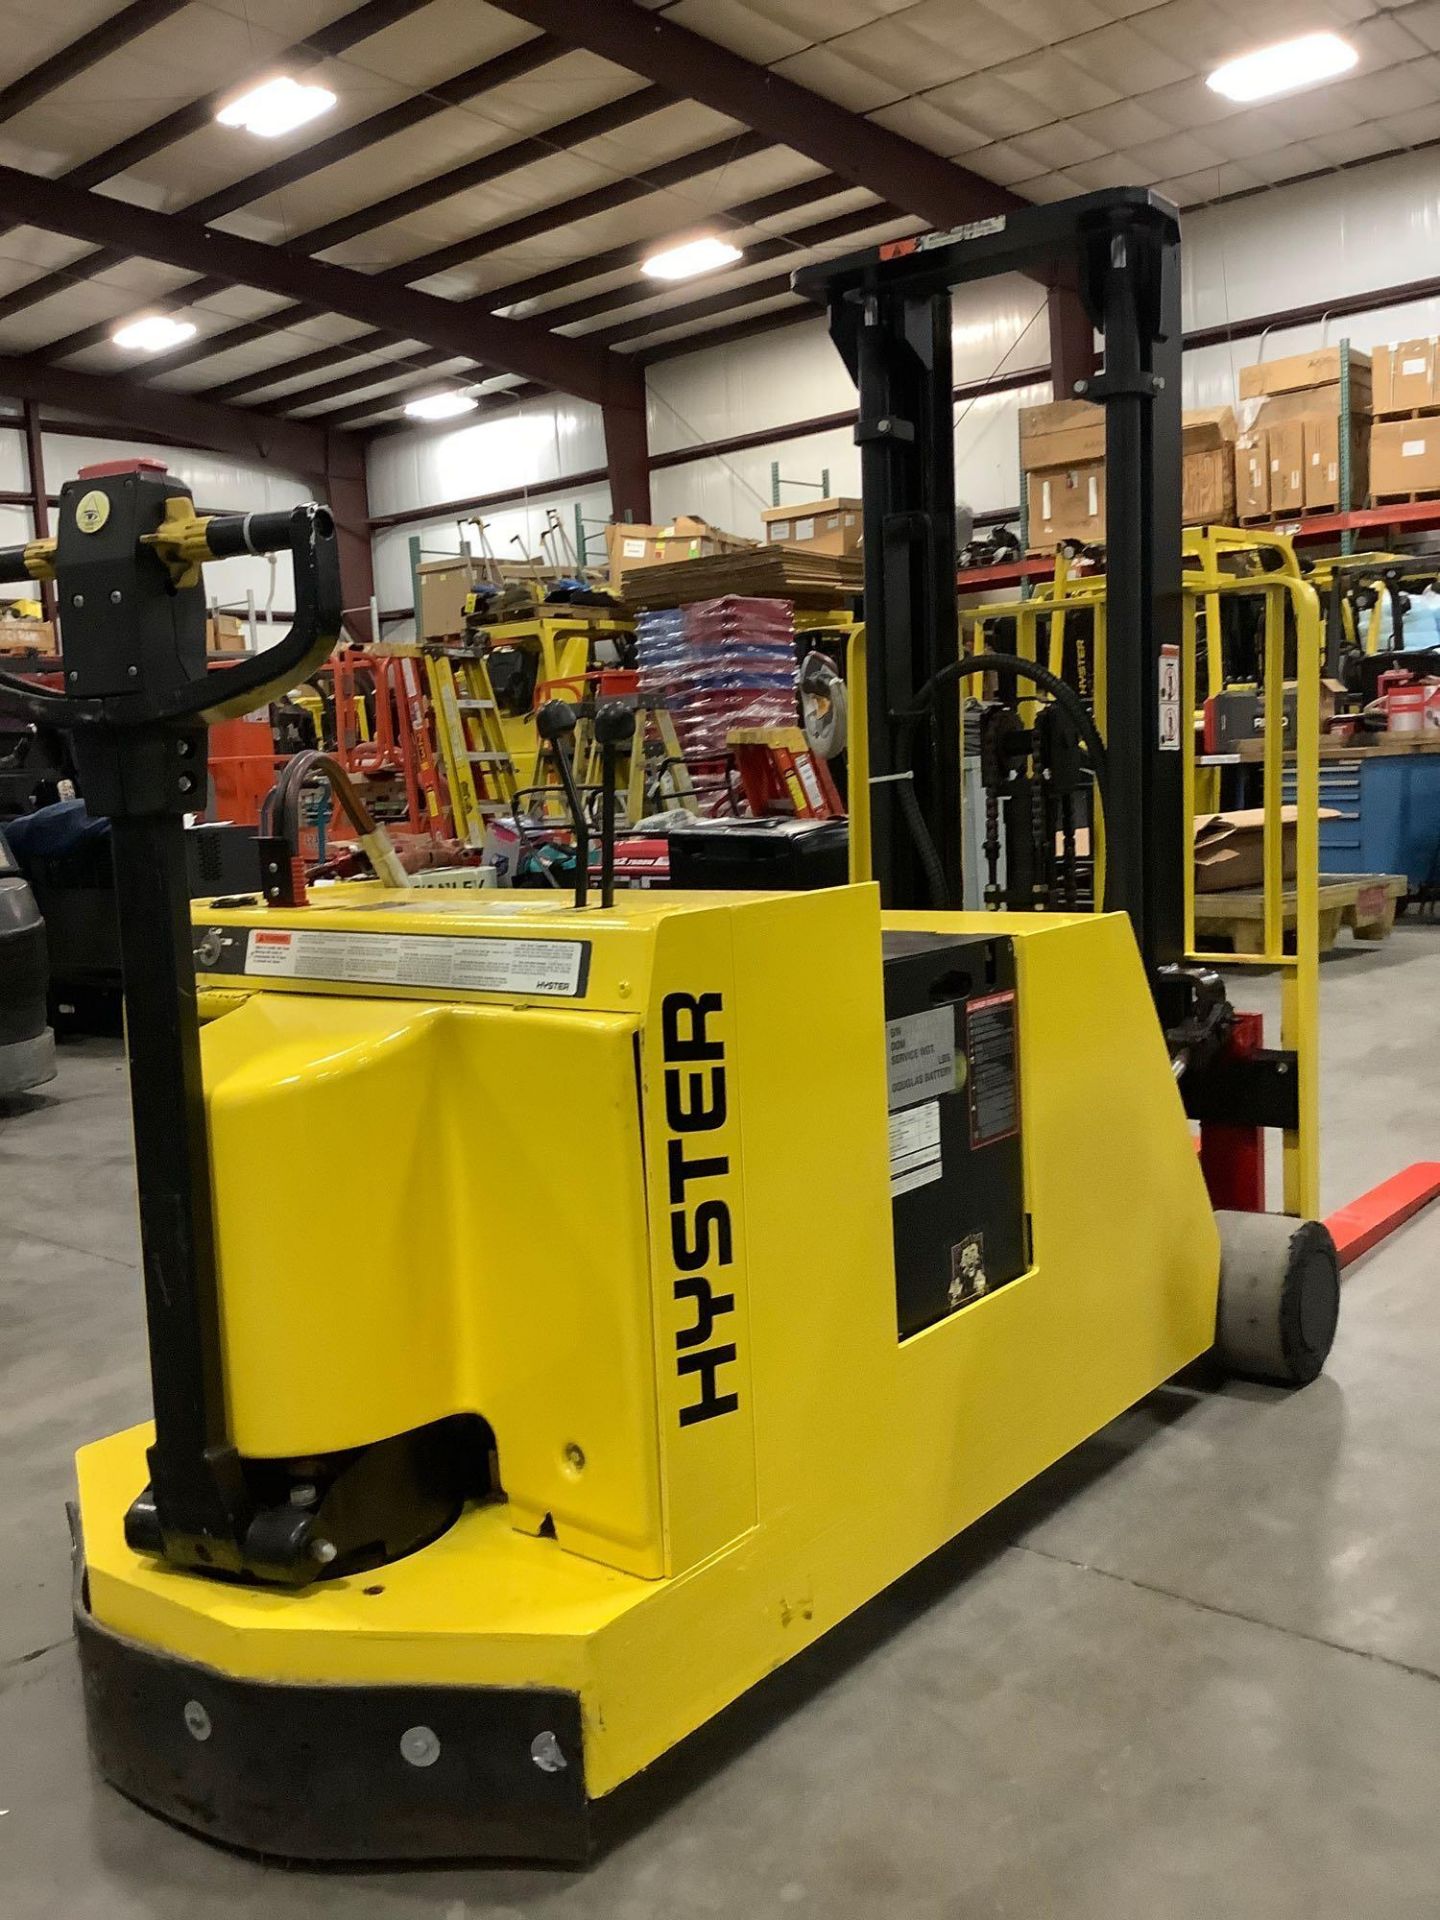 HYSTER ELECTRIC FORK LIFT TILT TRUCK MODEL W40XTC MAX CAPACITY 4000lbs LOAD HEIGHT 104.5 - Image 4 of 5